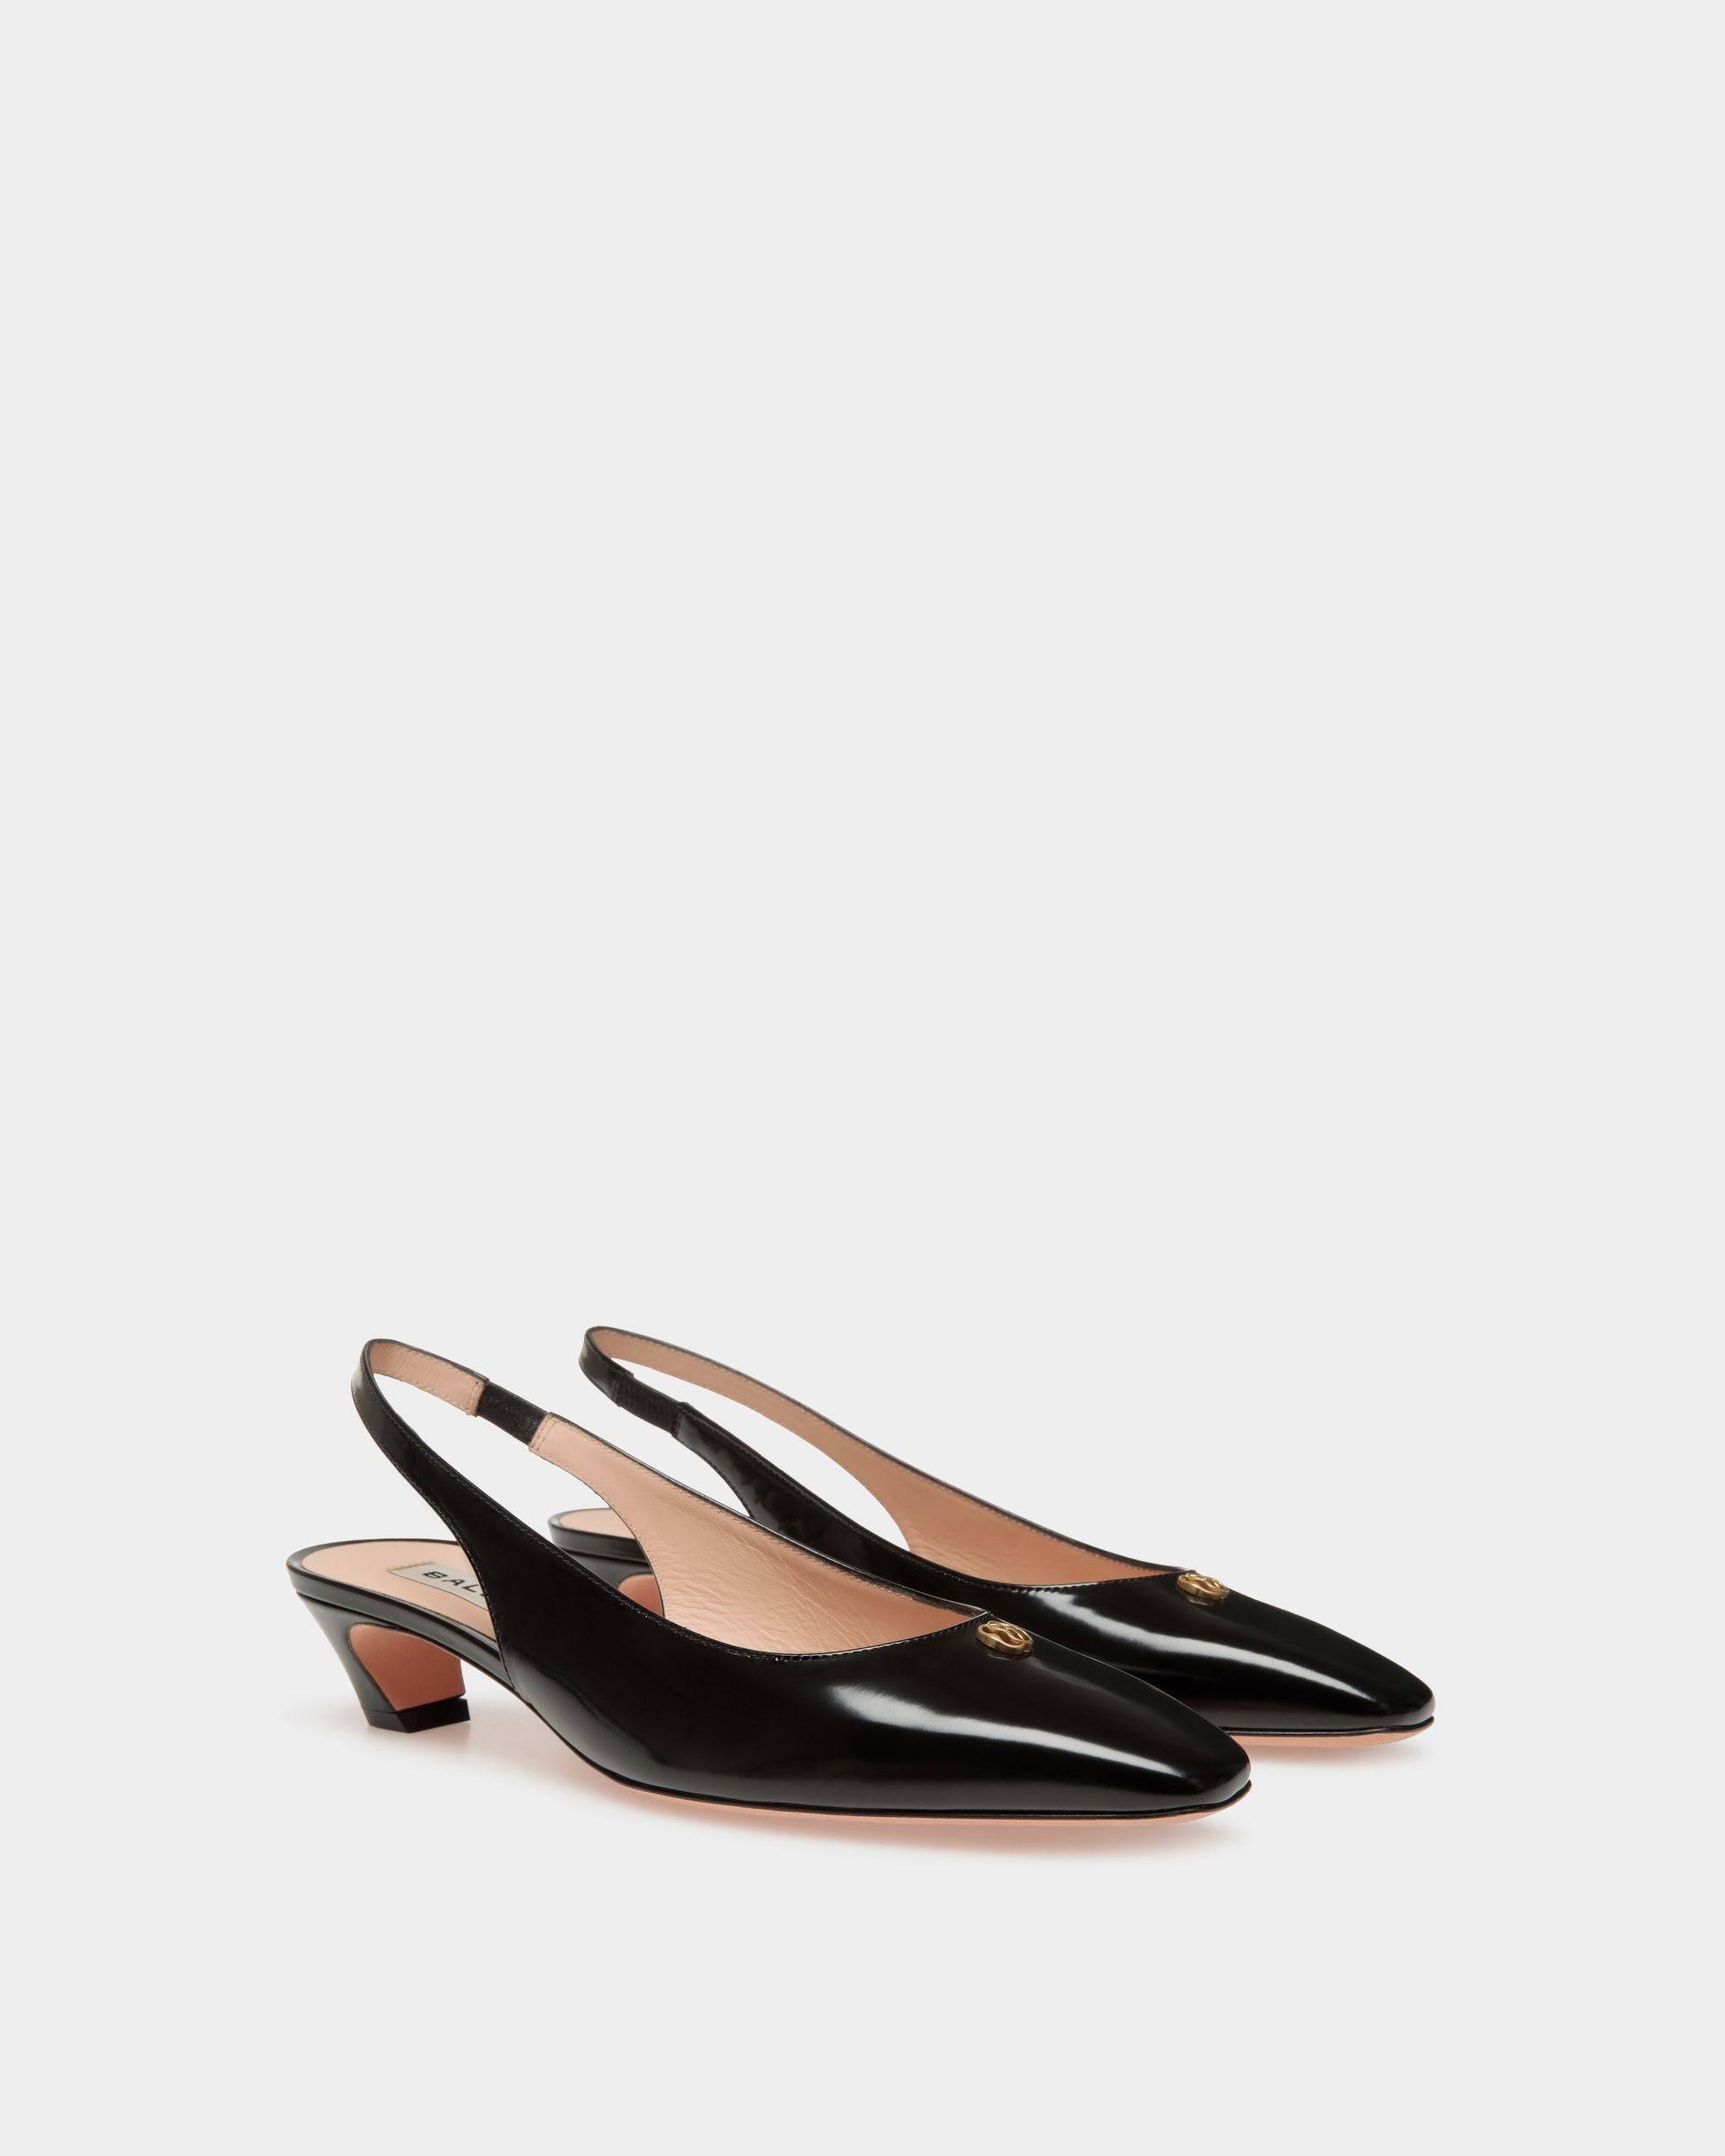 Sylt | Women's Slingback Pump in Black Leather | Bally | Still Life 3/4 Front